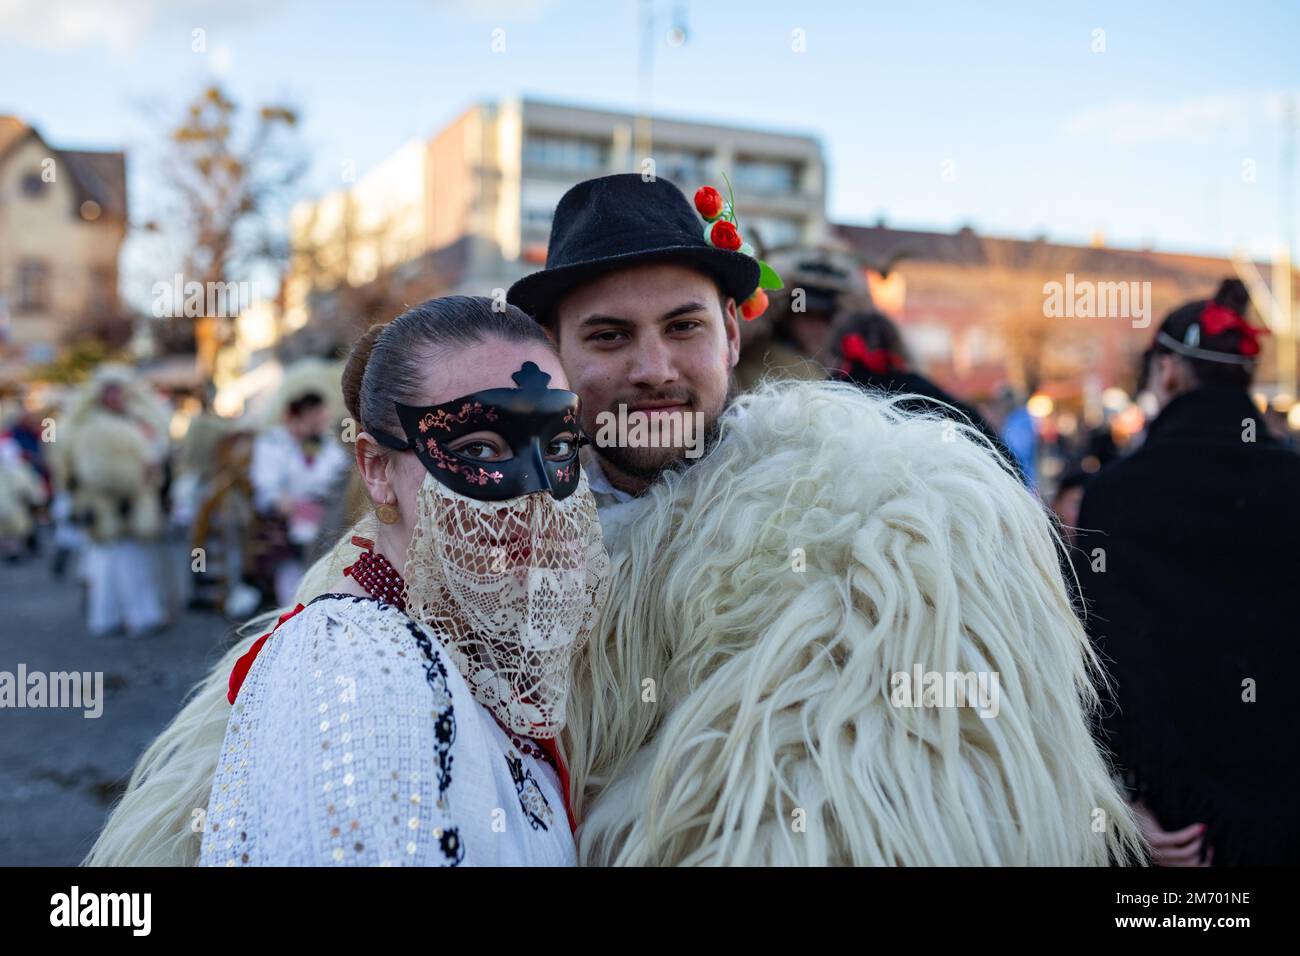 Couple in traditional costume during the annual Buso festivities / Poklade from Mohacs, Hungary Stock Photo